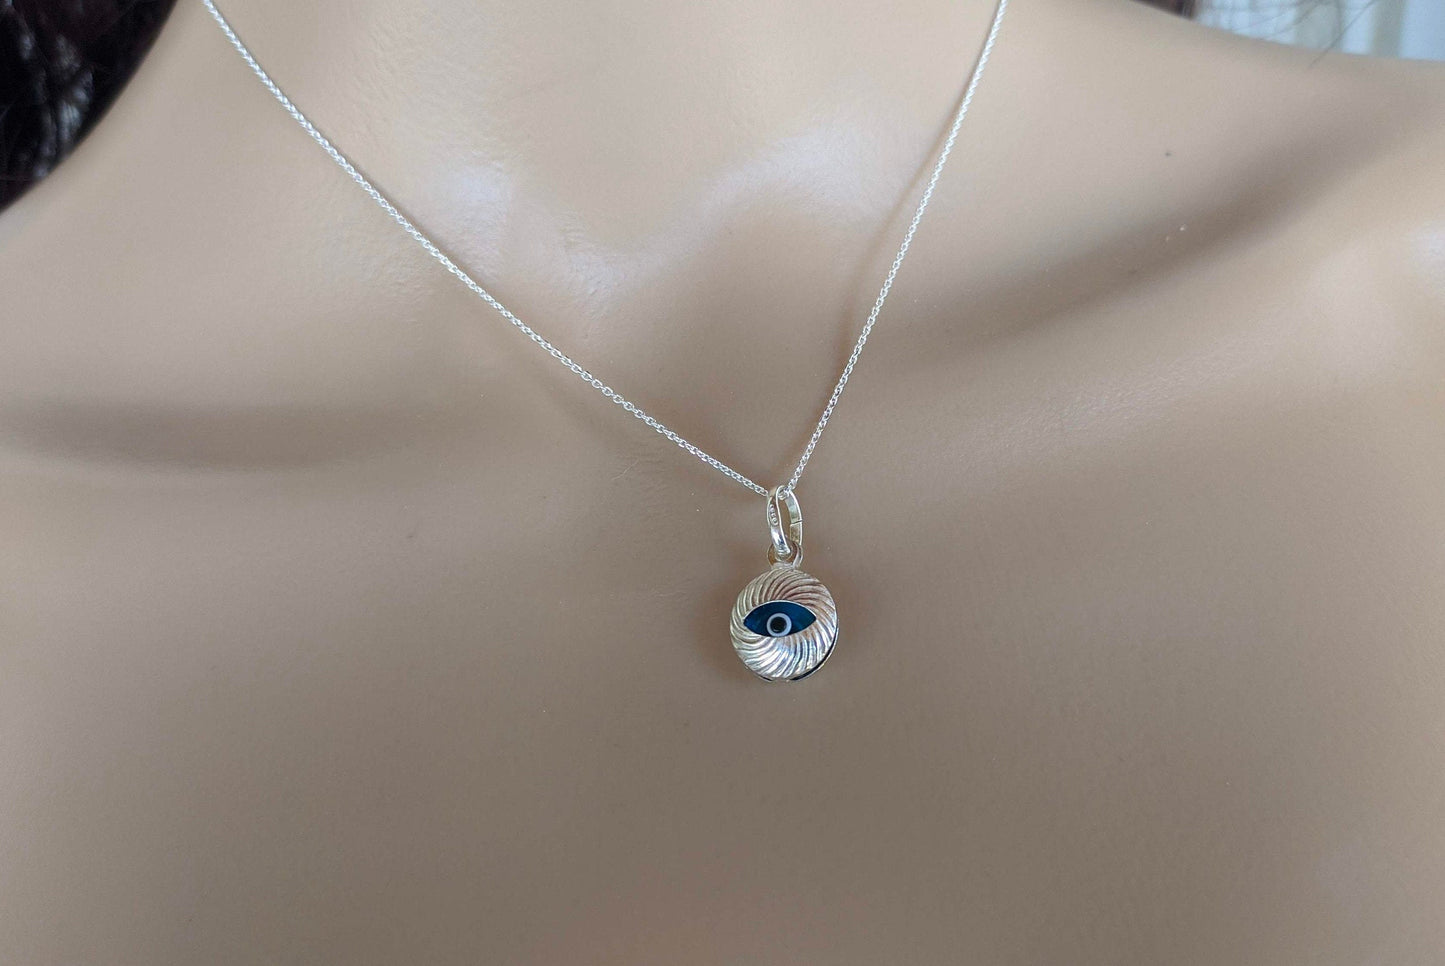 Sterling silver evil eye necklace, women's protection jewelry, Greek jewelry for her